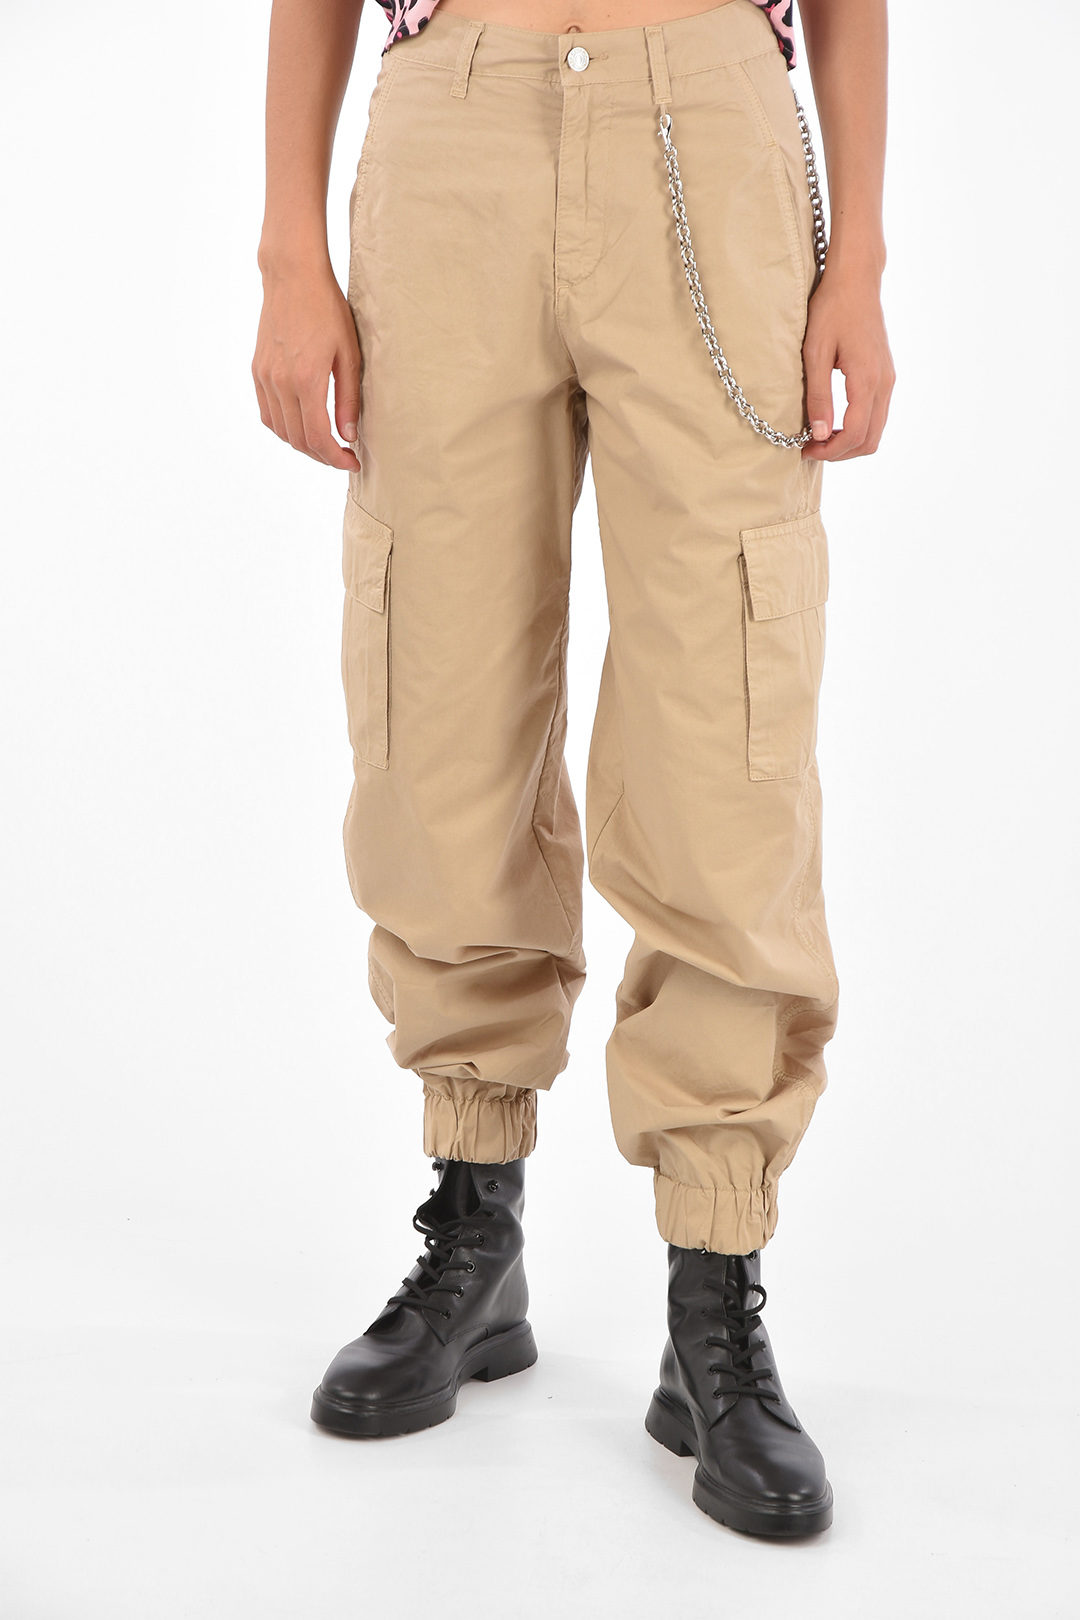 Flap Pocket Buckle Tape Cargo Trousers With Chain | Pants for women,  Clothes for women, Cargo pants outfit